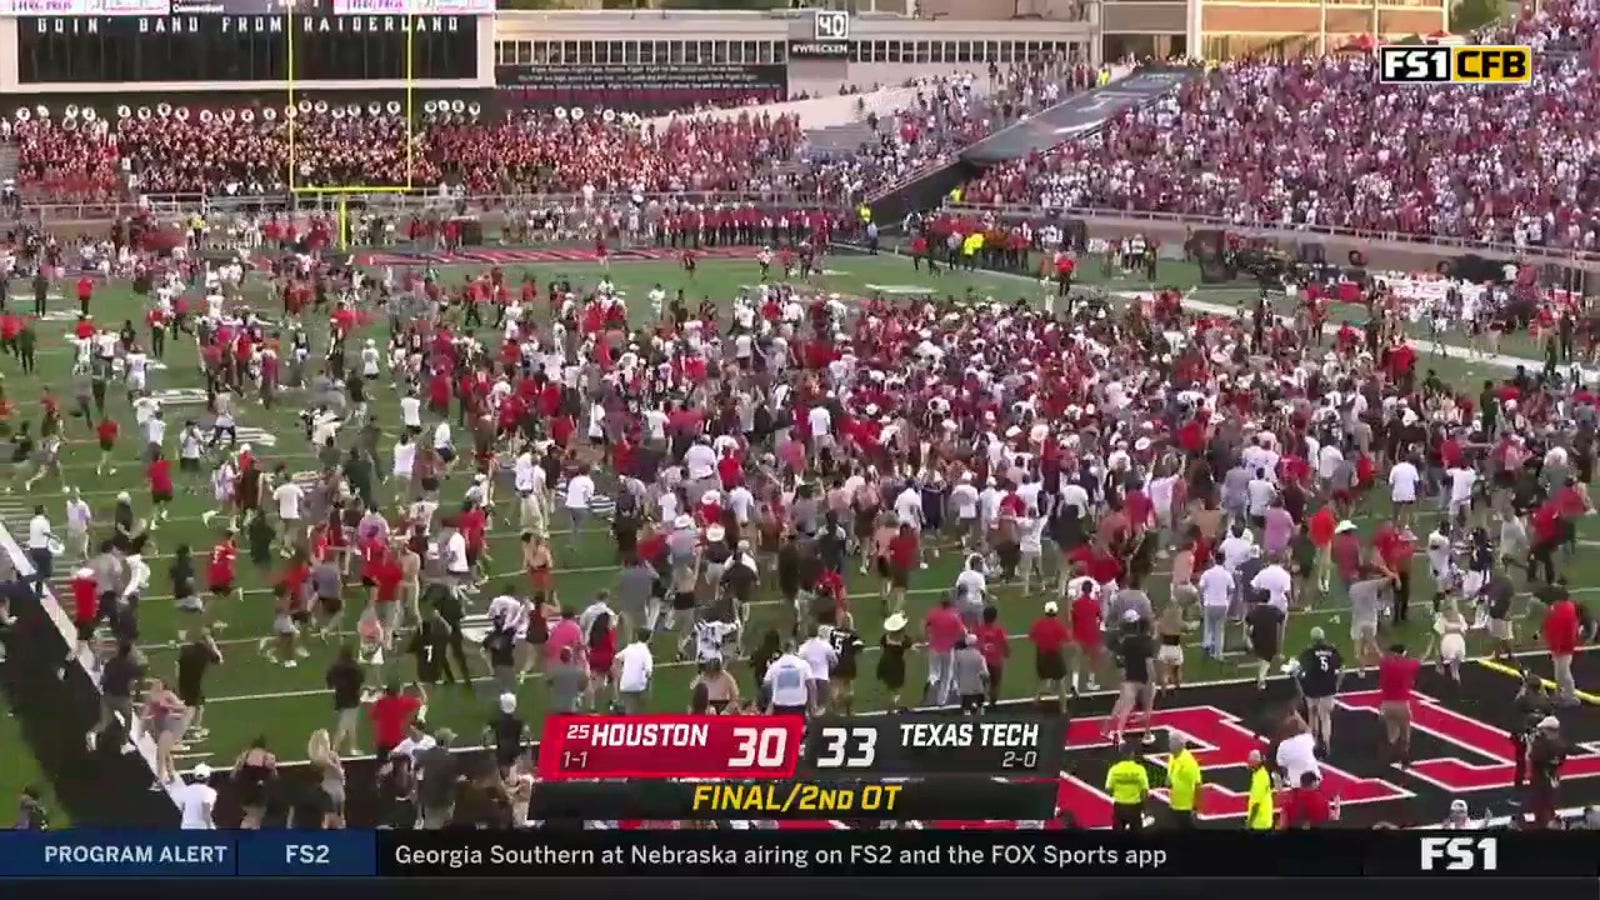 Tech fans rush the field to celebrate upset